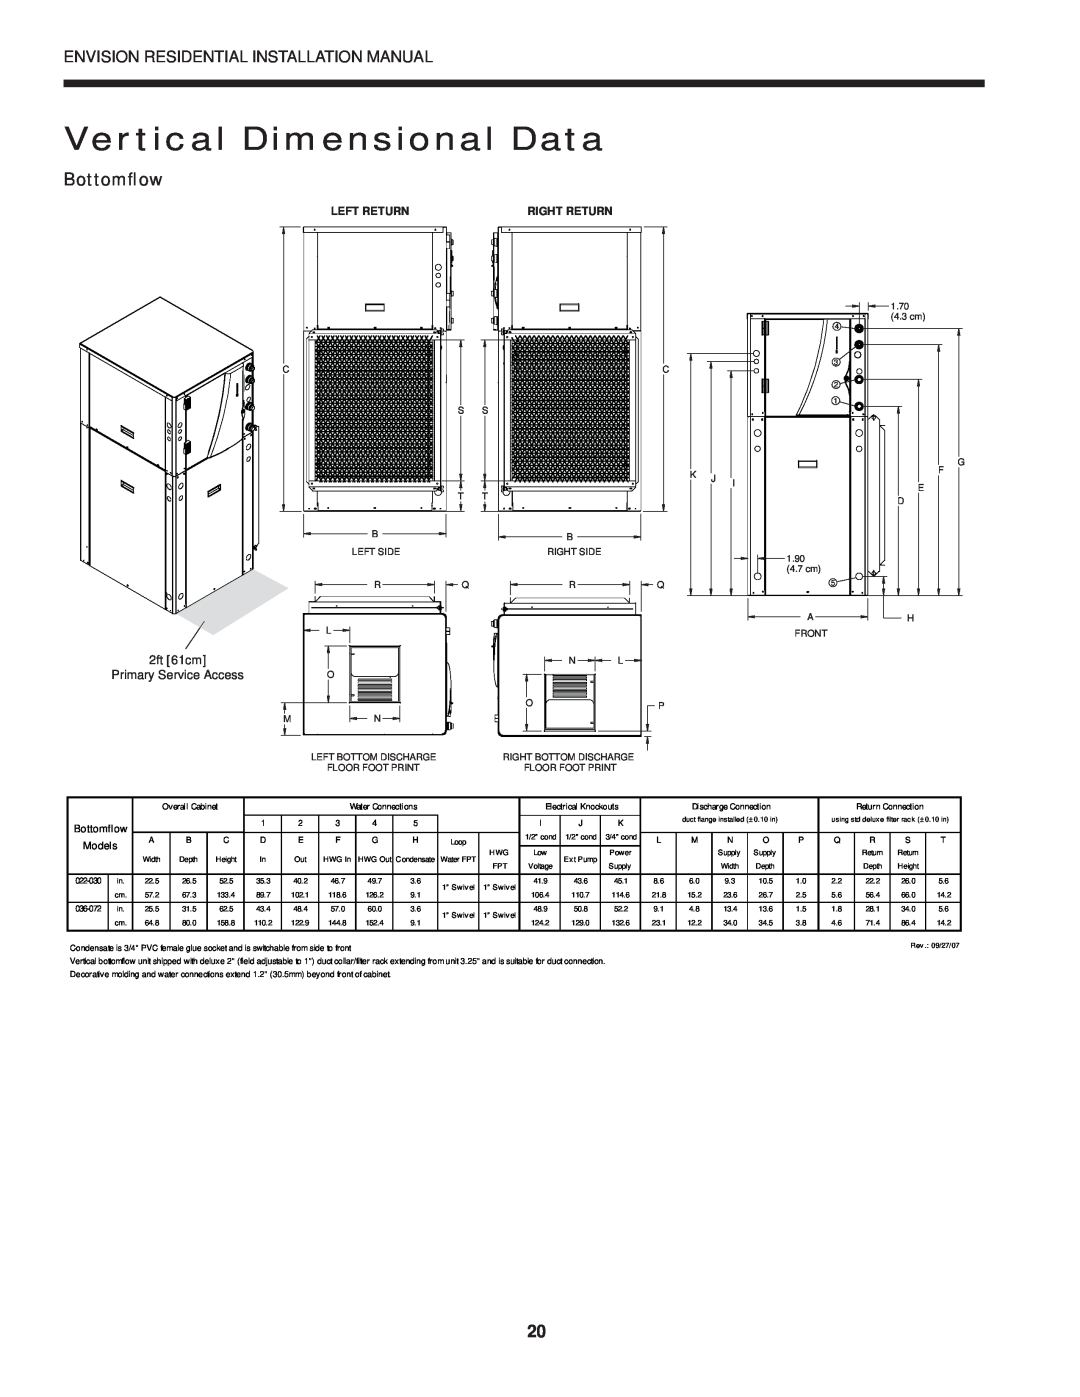 Envision Peripherals R-410A installation manual Vertical Dimensional Data, Bottomﬂow, Models, Right Return, Bottomflow 